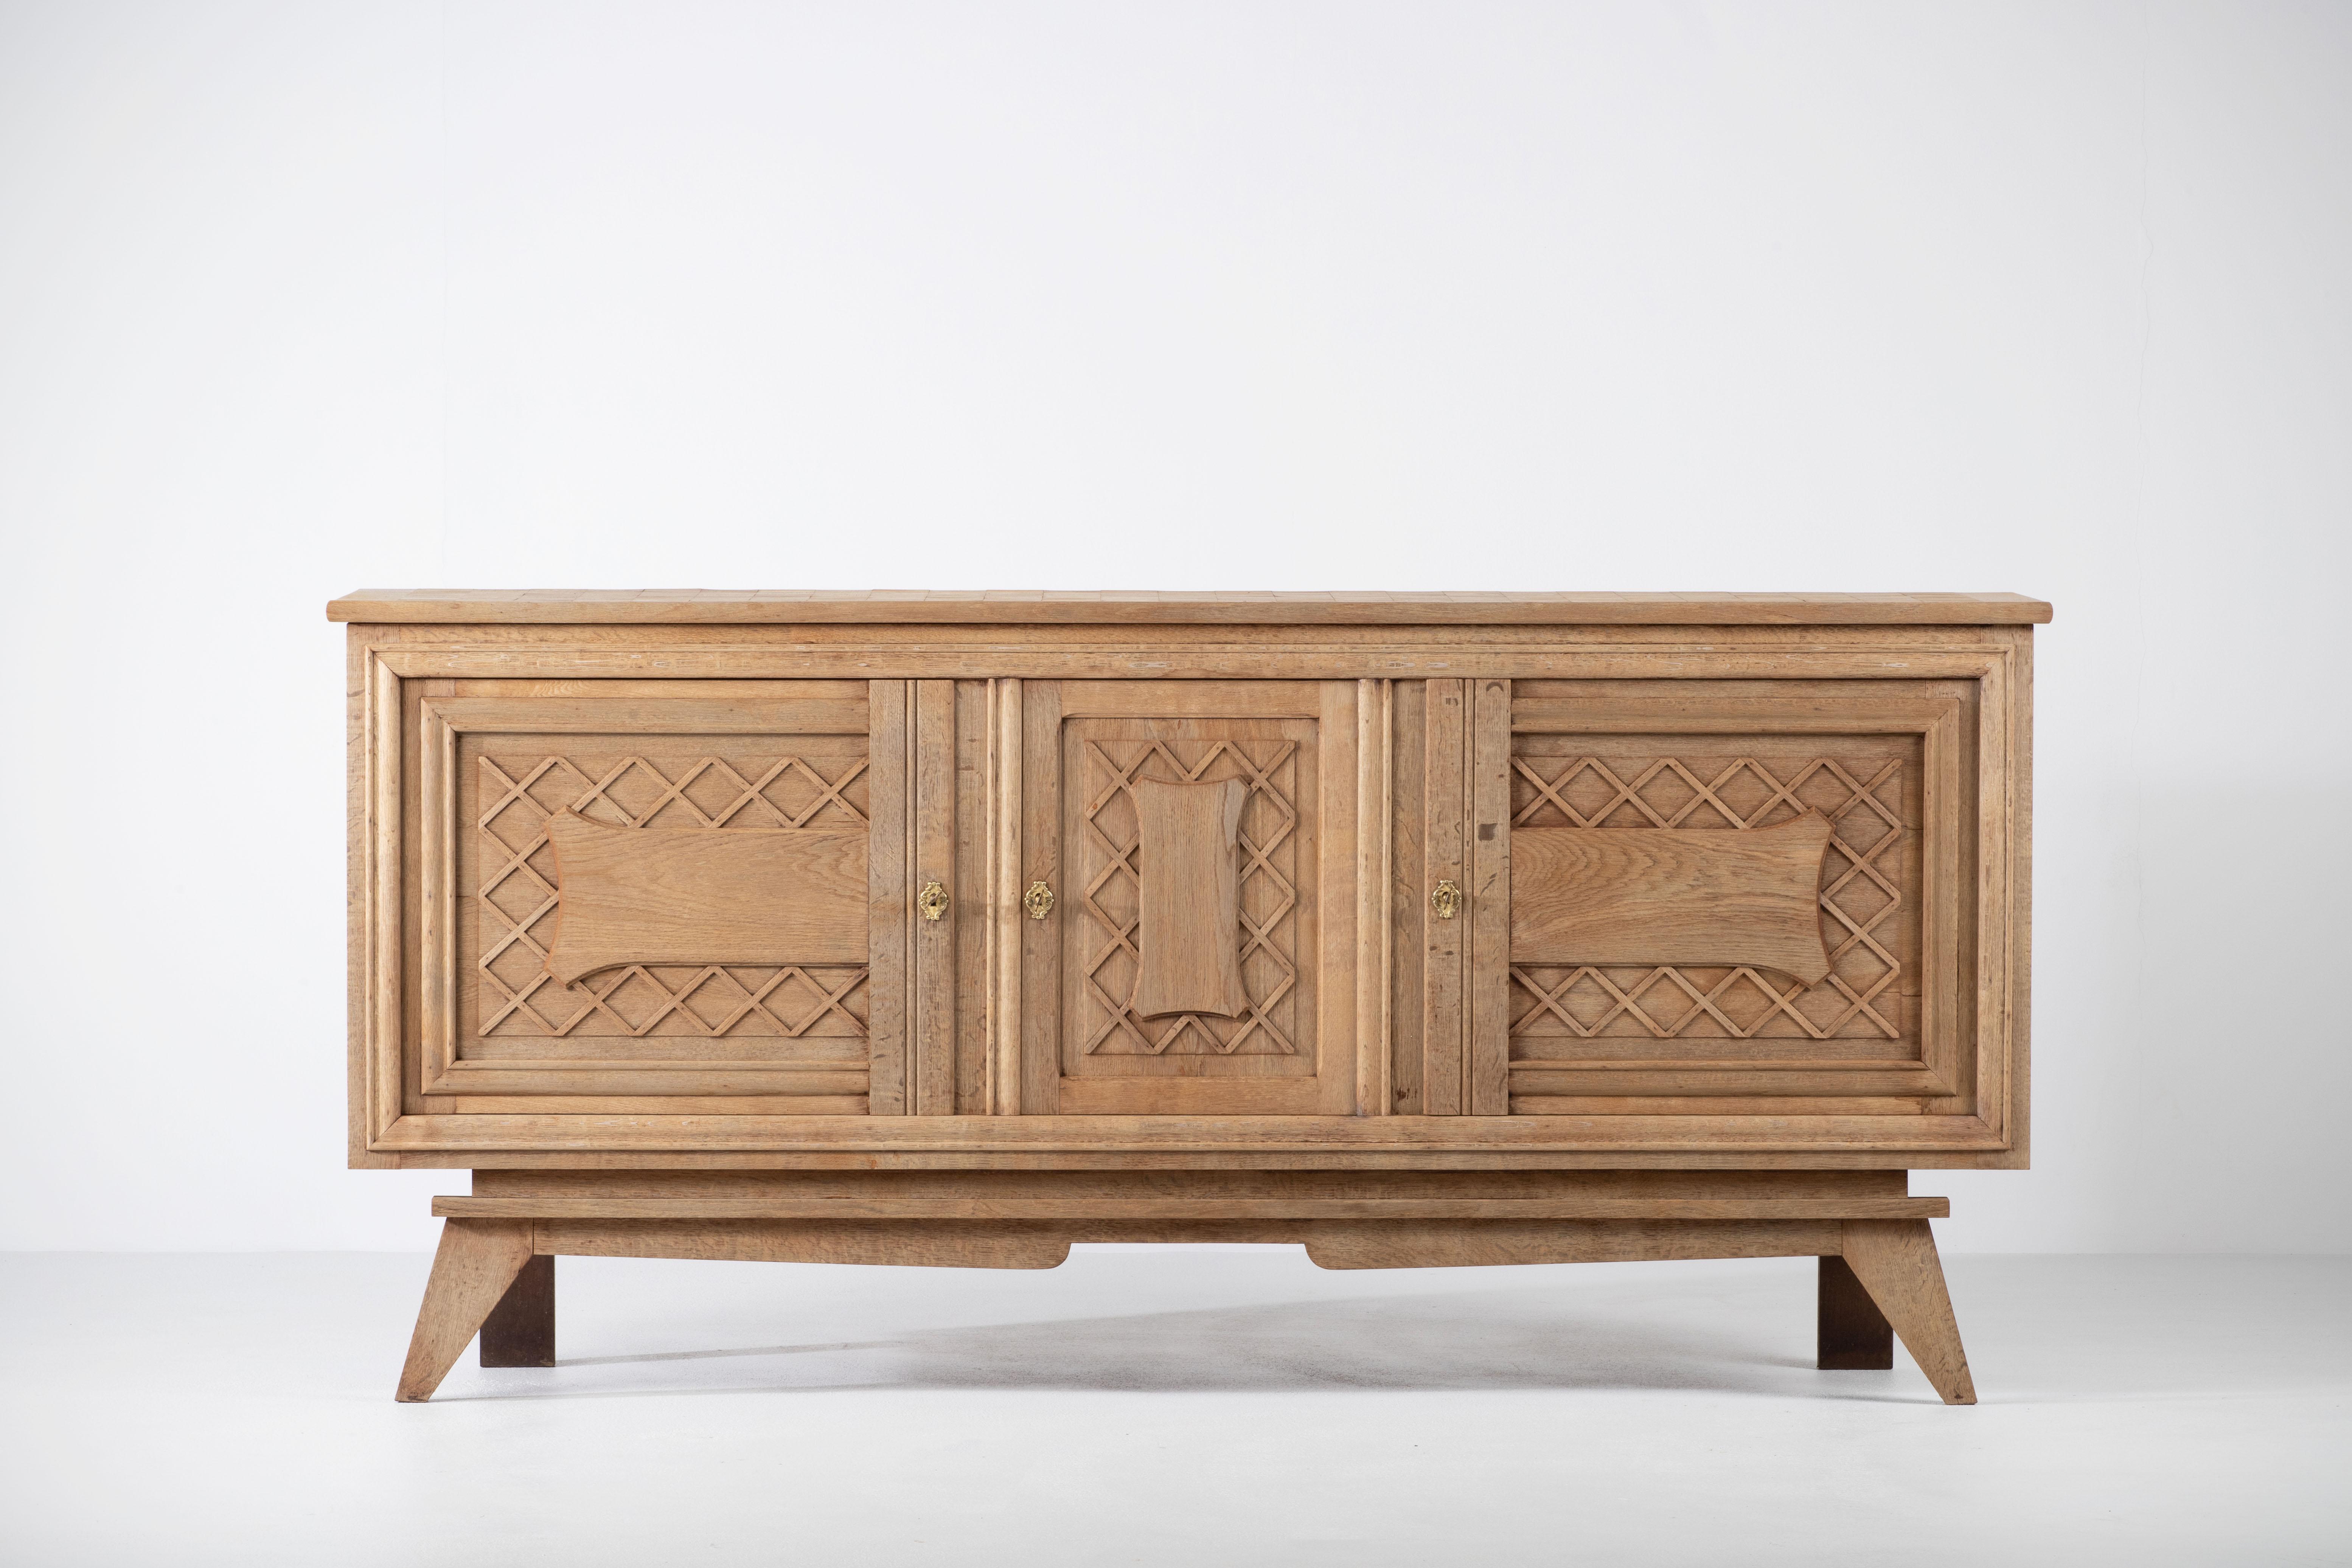 Very elegant Credenza in solid oak, France, 1940s.
Art Deco Brutalist sideboard. 
The credenza consists of Two storage facilities covered with graphic designed doors and a column of drawers.
The refined wooden structures on the doors create a